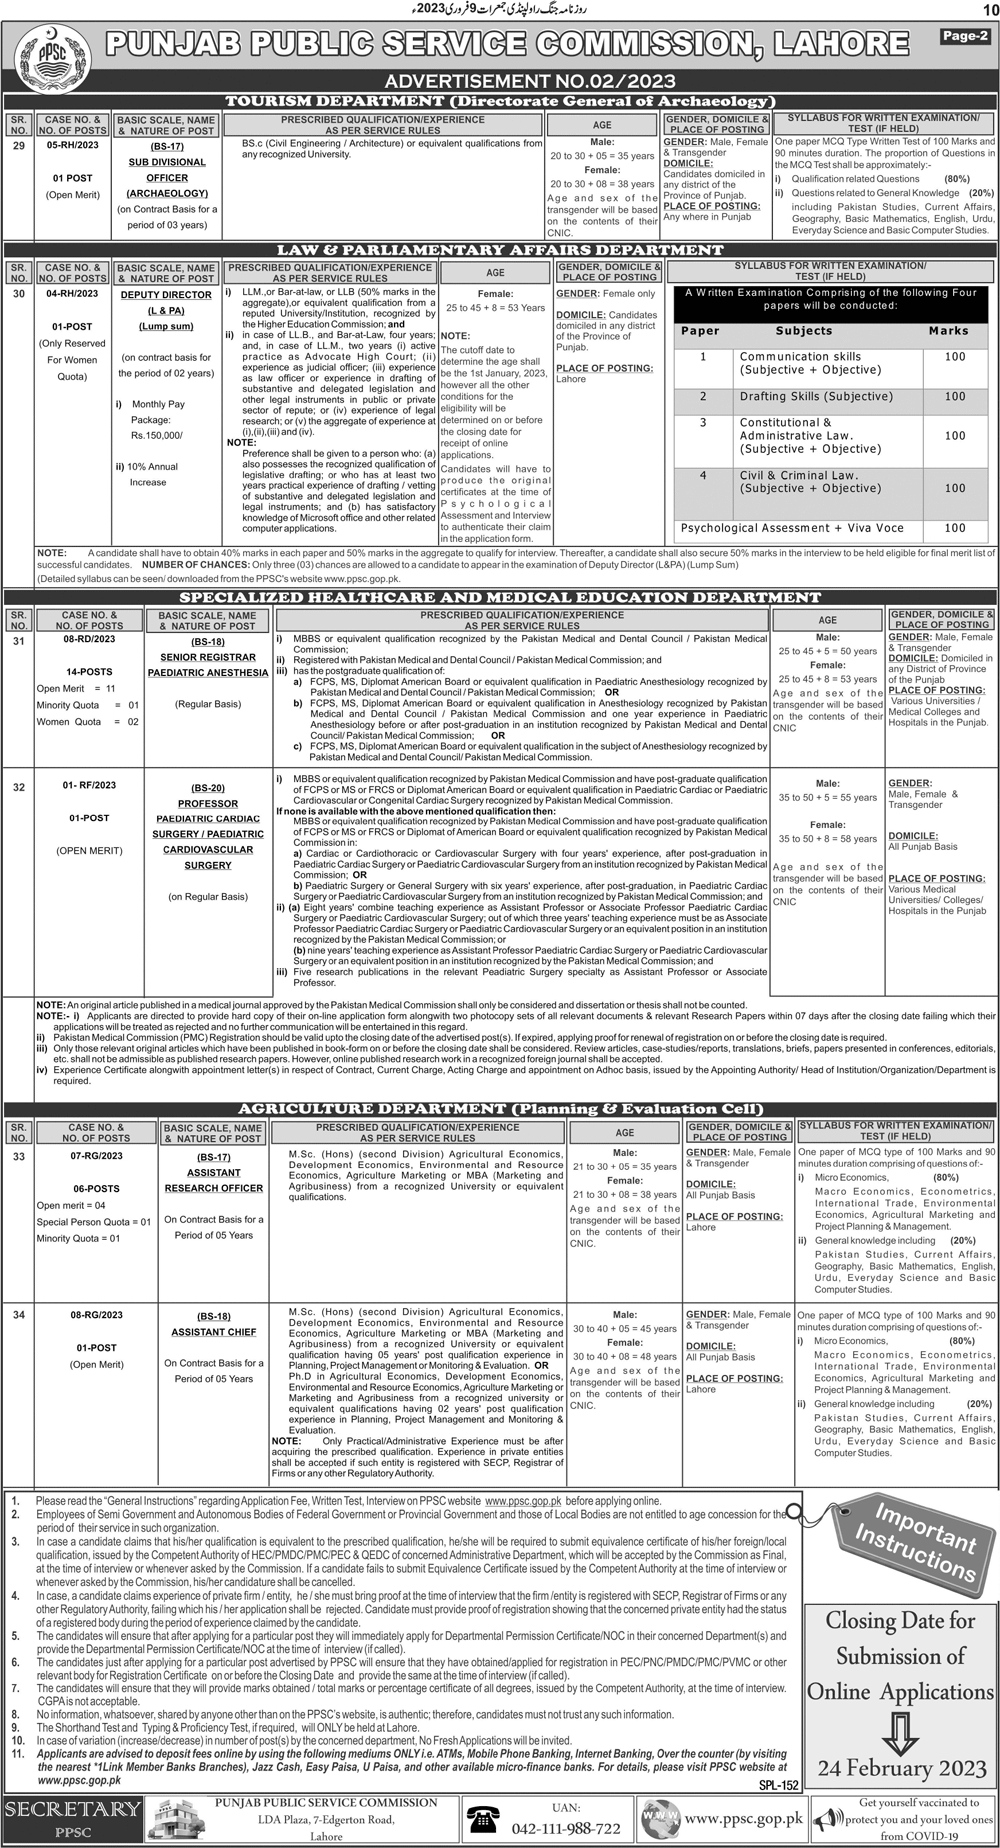 The Latest ad of PPSC Vacancies in Agriculture, Health and Housing Development Department